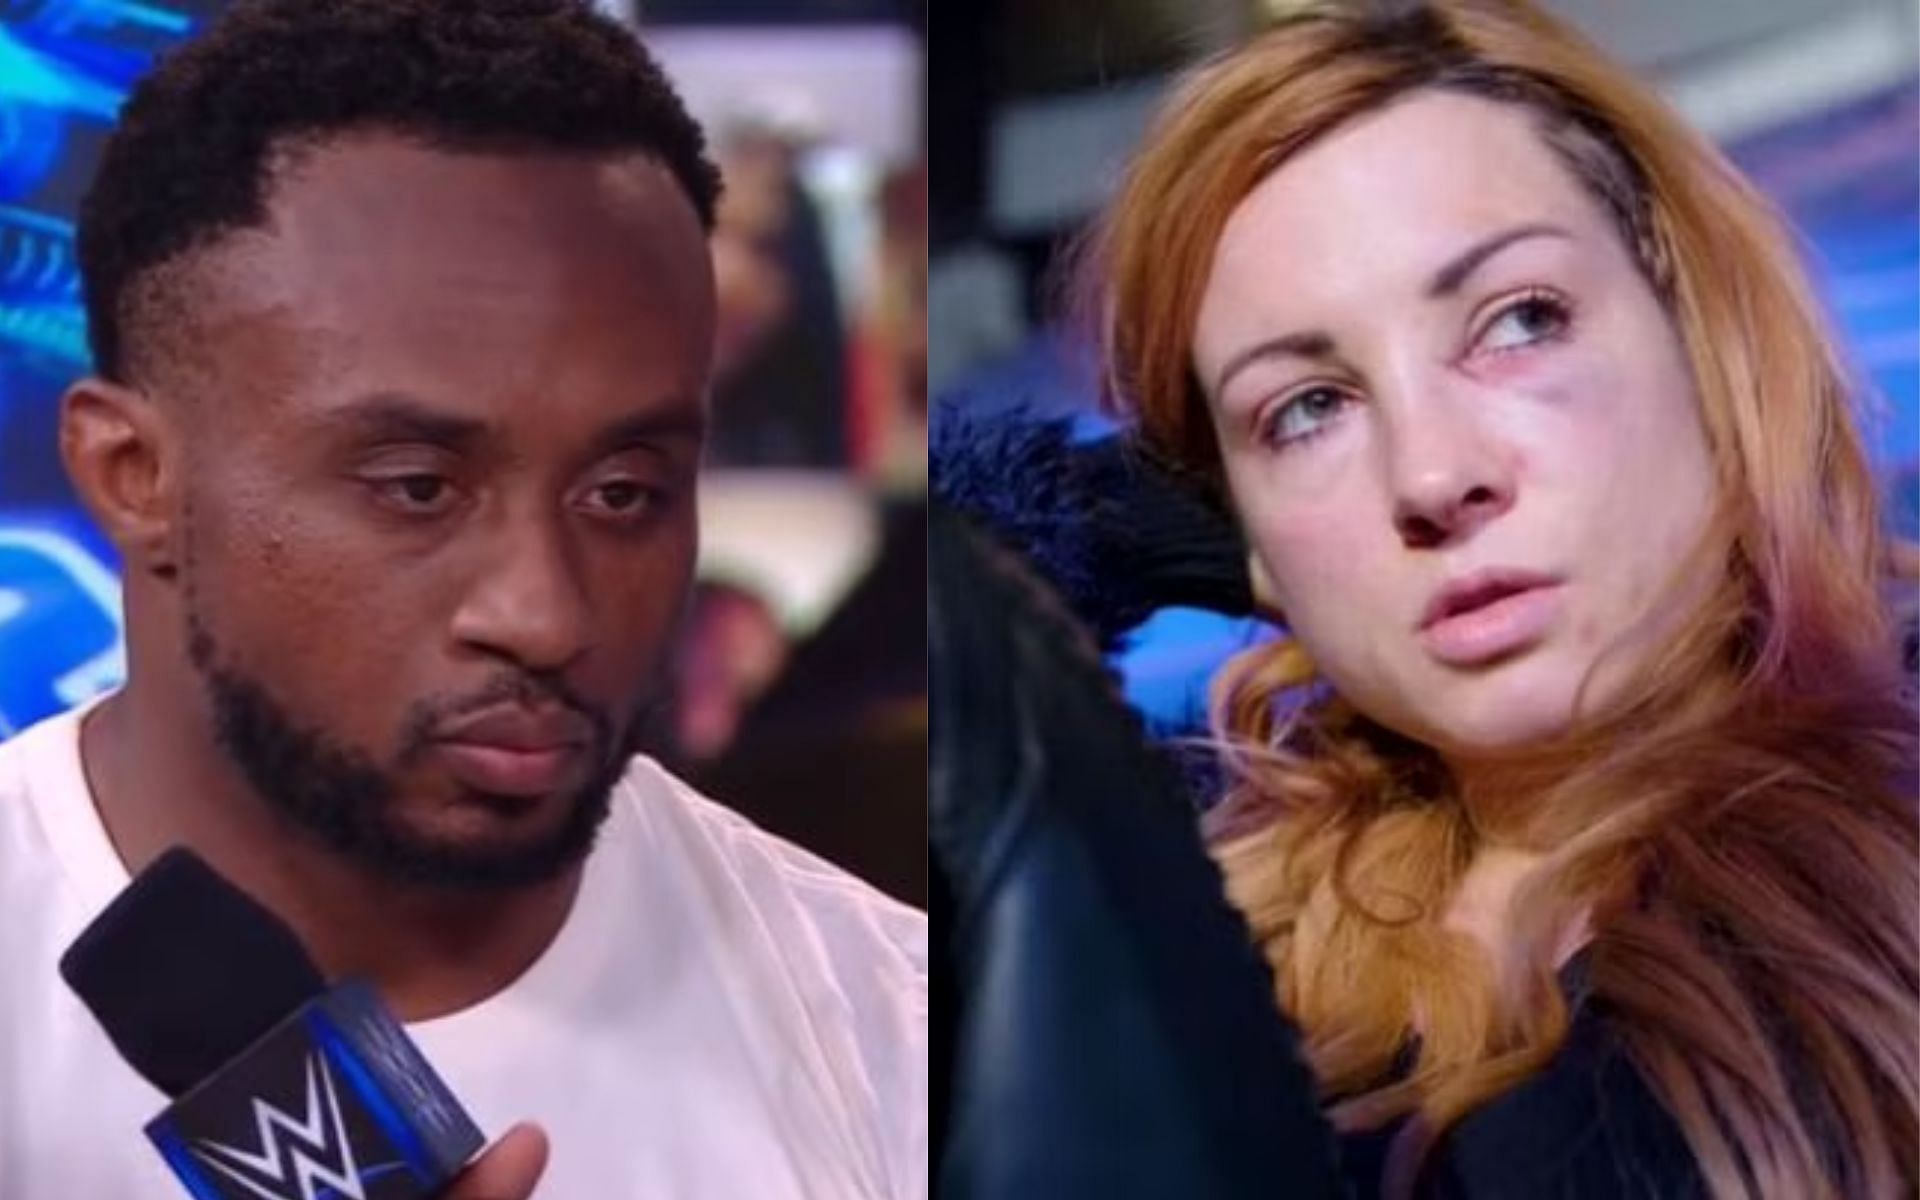 Big E and Becky Lynch met backstage this week